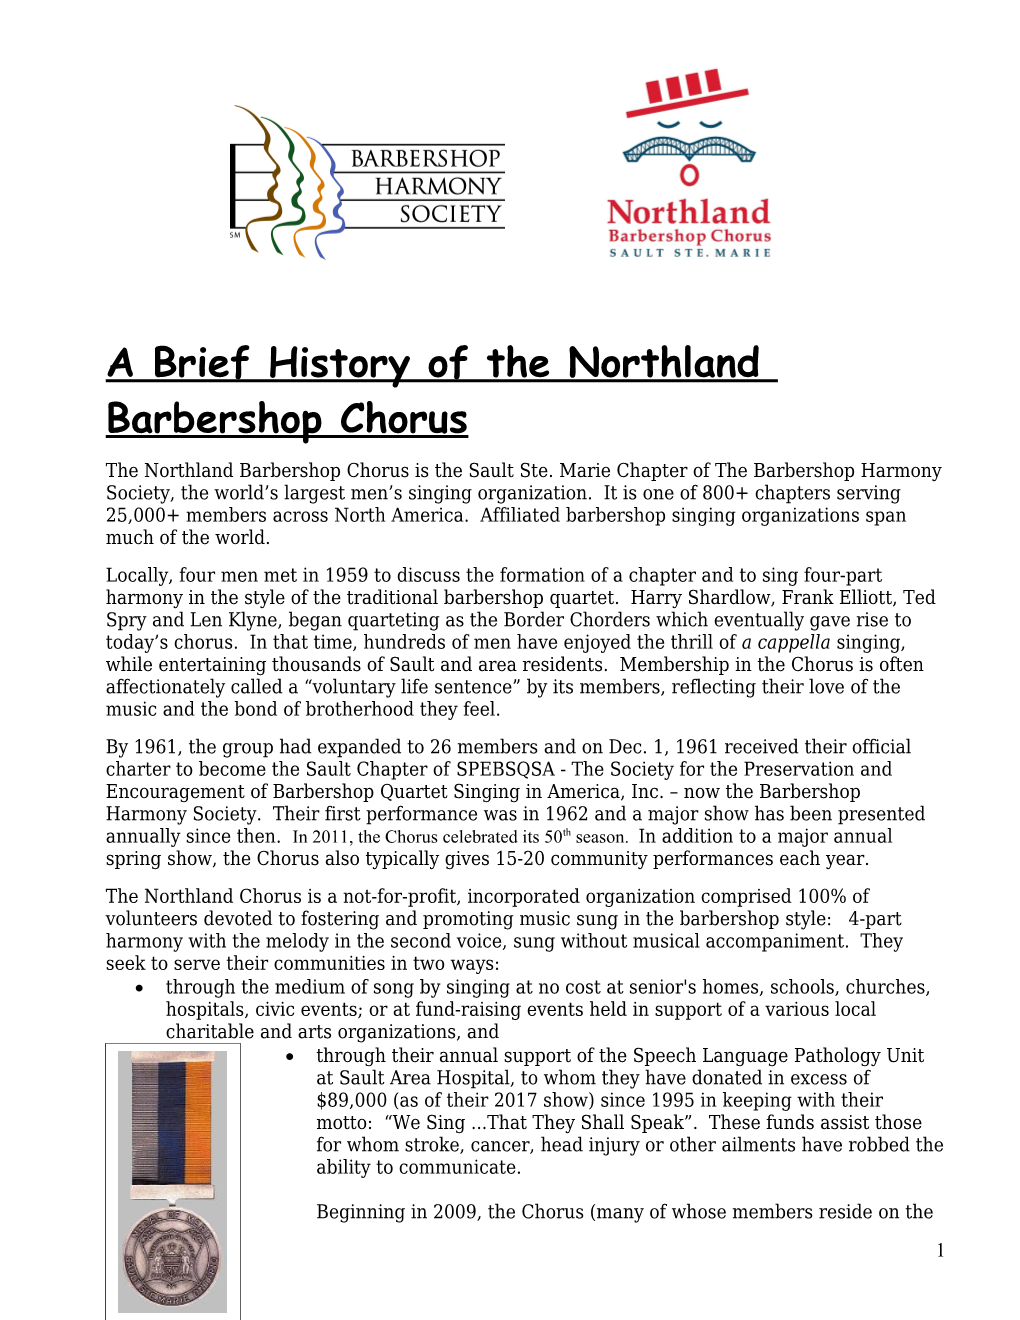 A Brief History of the Northland Barbershop Chorus